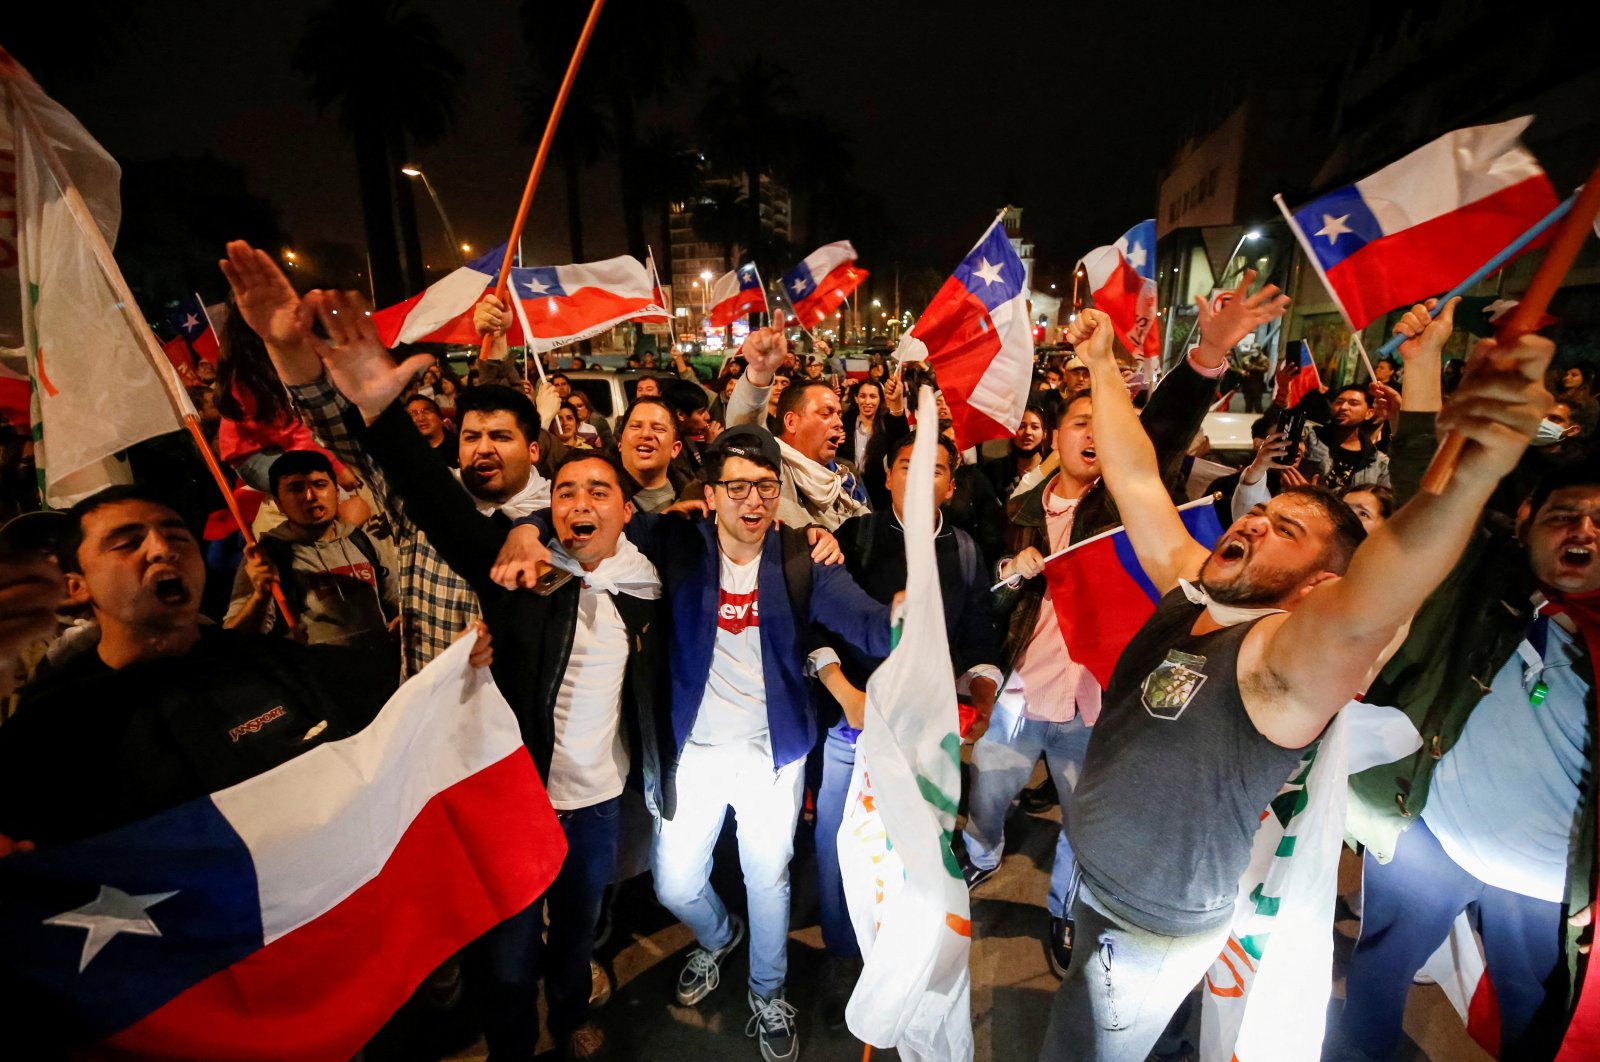 Supporters of "I Reject" react to early results of the referendum on a new Chilean constitution in Valparaiso, Chile, Sept. 4, 2022. (Reuters Photo)